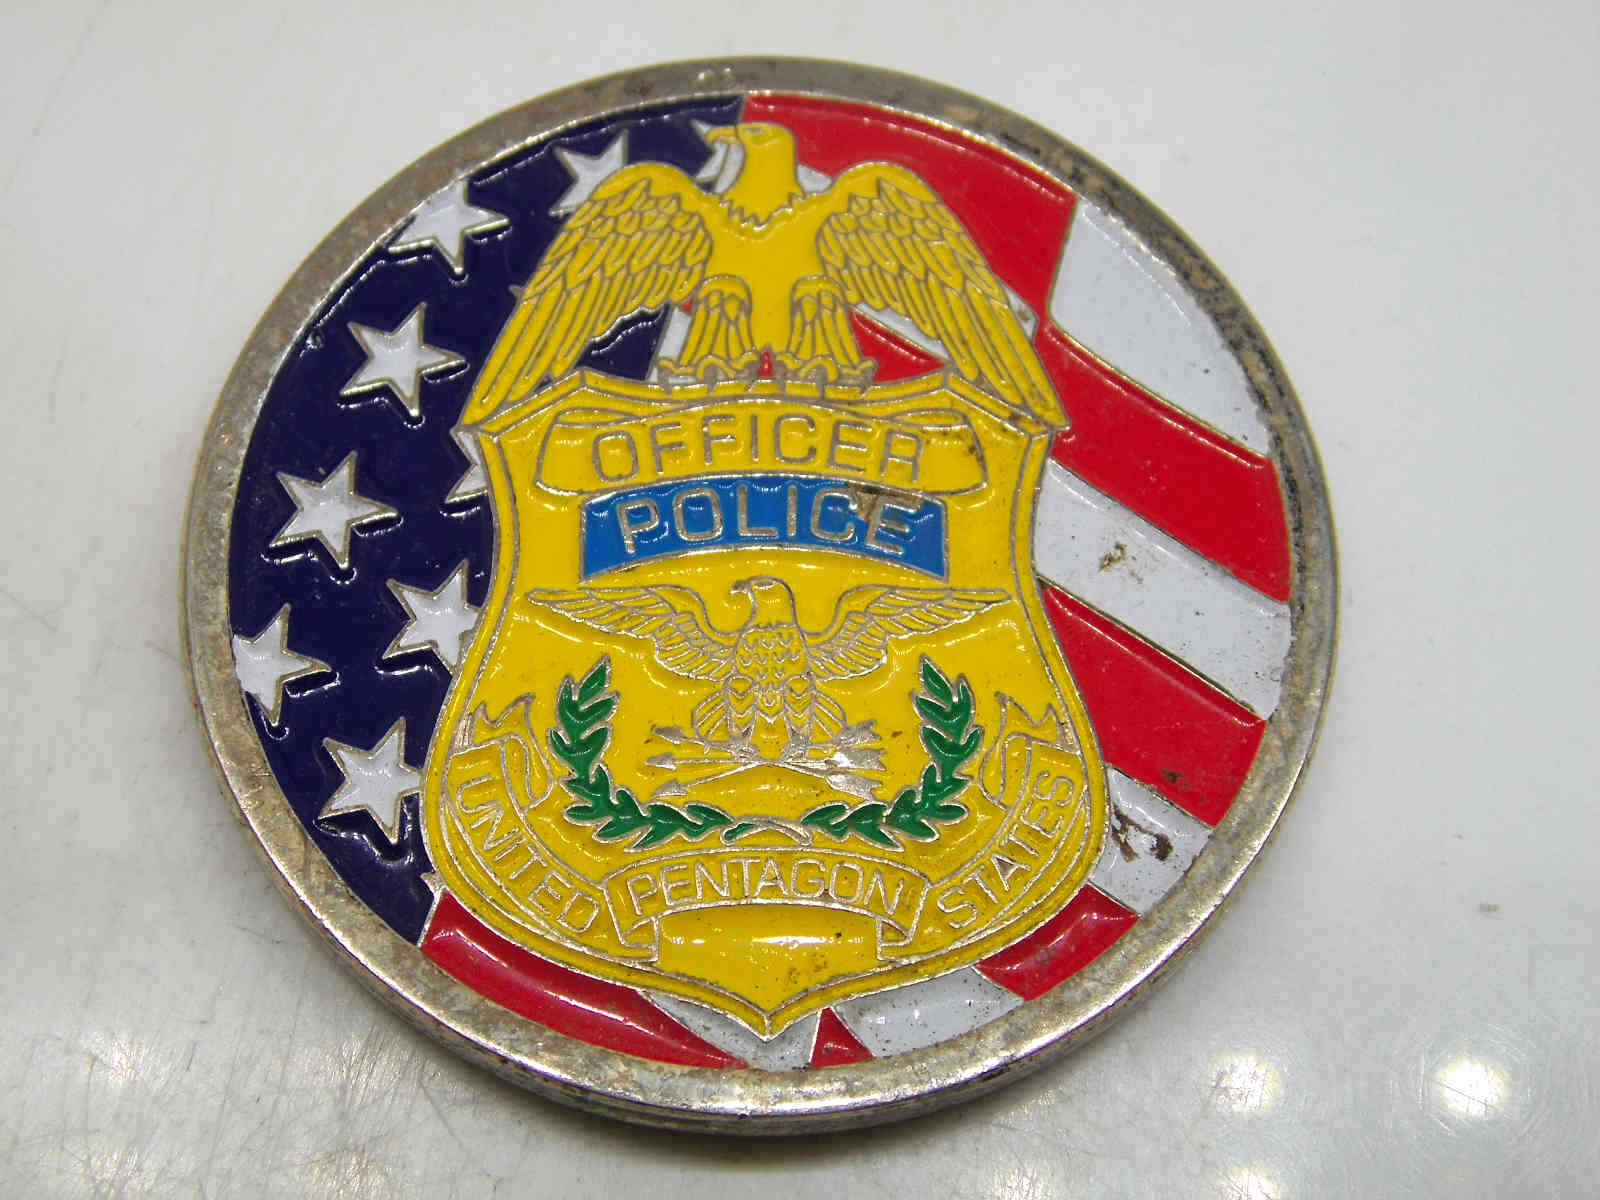 UNITED STATES PENTAGON POLICE OFFICER FORCE PROTECTION AGENCY CHALLENGE COIN